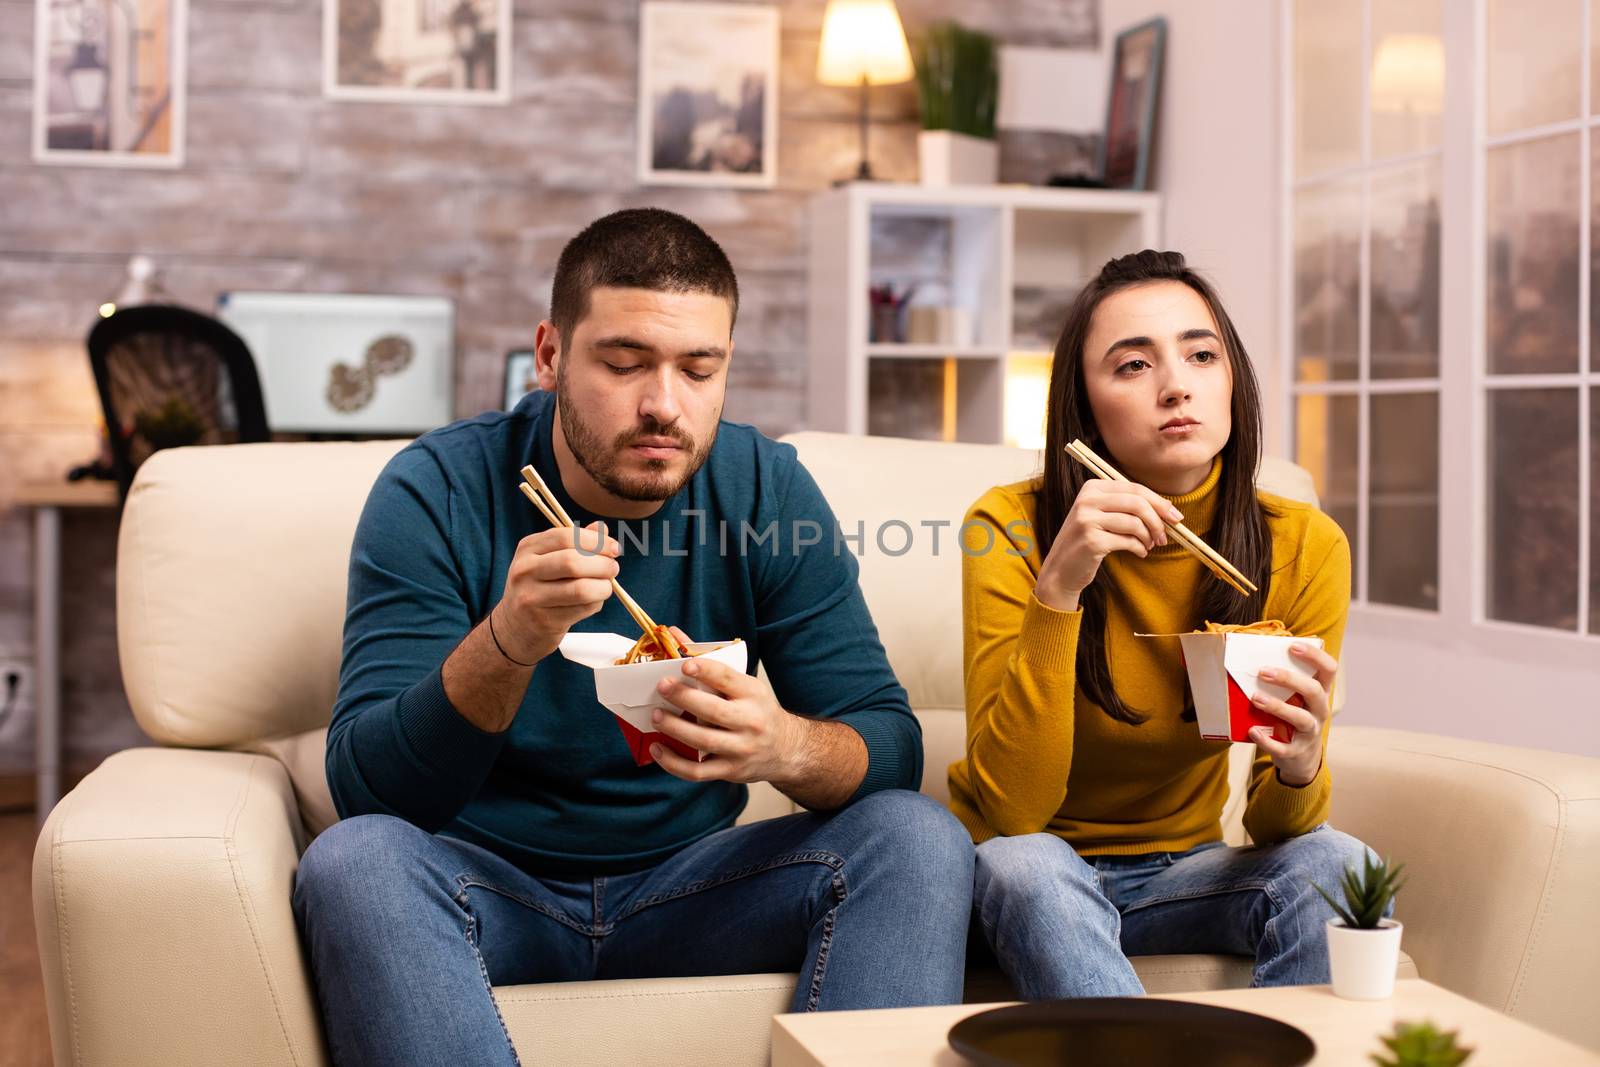 In modern cozy living room couple is enjoying takeaway noodles while watching TV by DCStudio